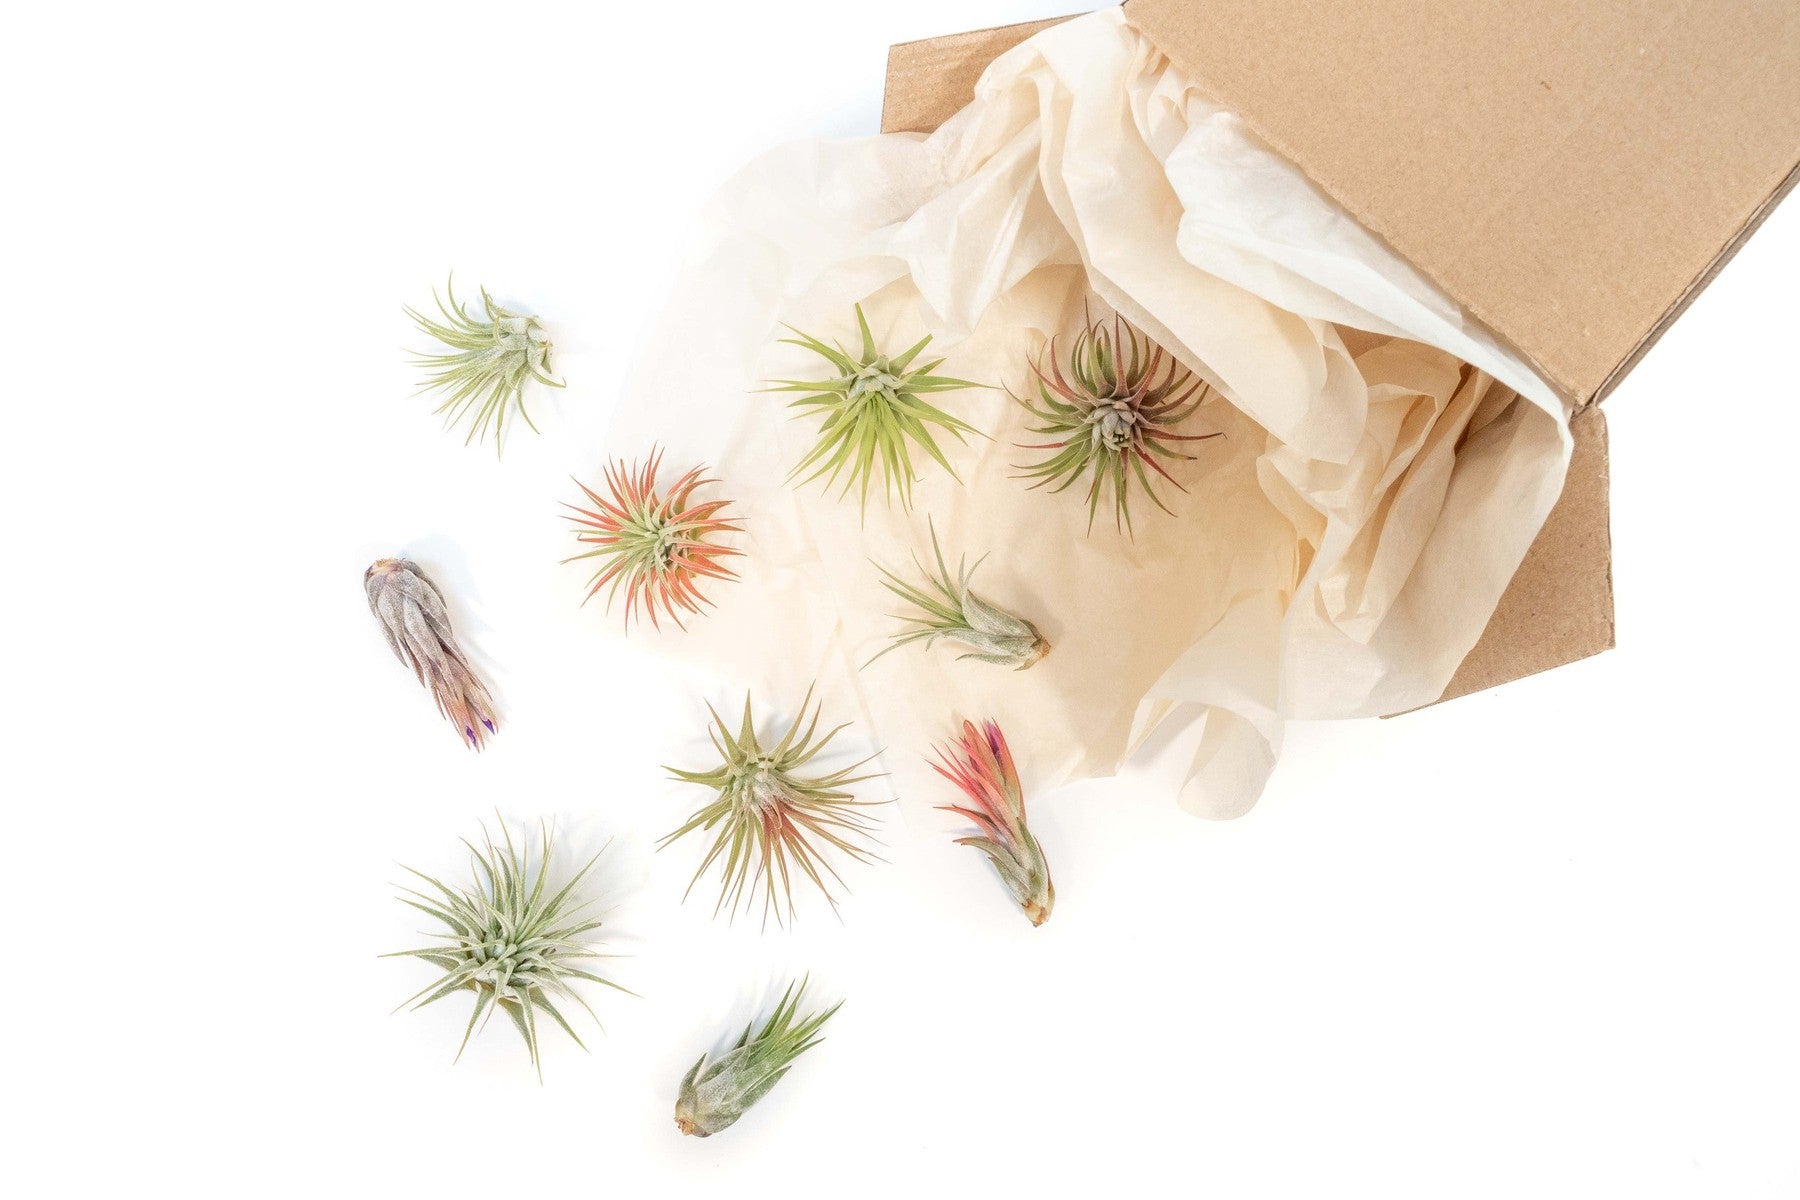 SALE - Tillandsia Ionantha Air Plant Super Packs - Set of 20, 30 or 50 - 70% Off-airplant-The Succulent Source